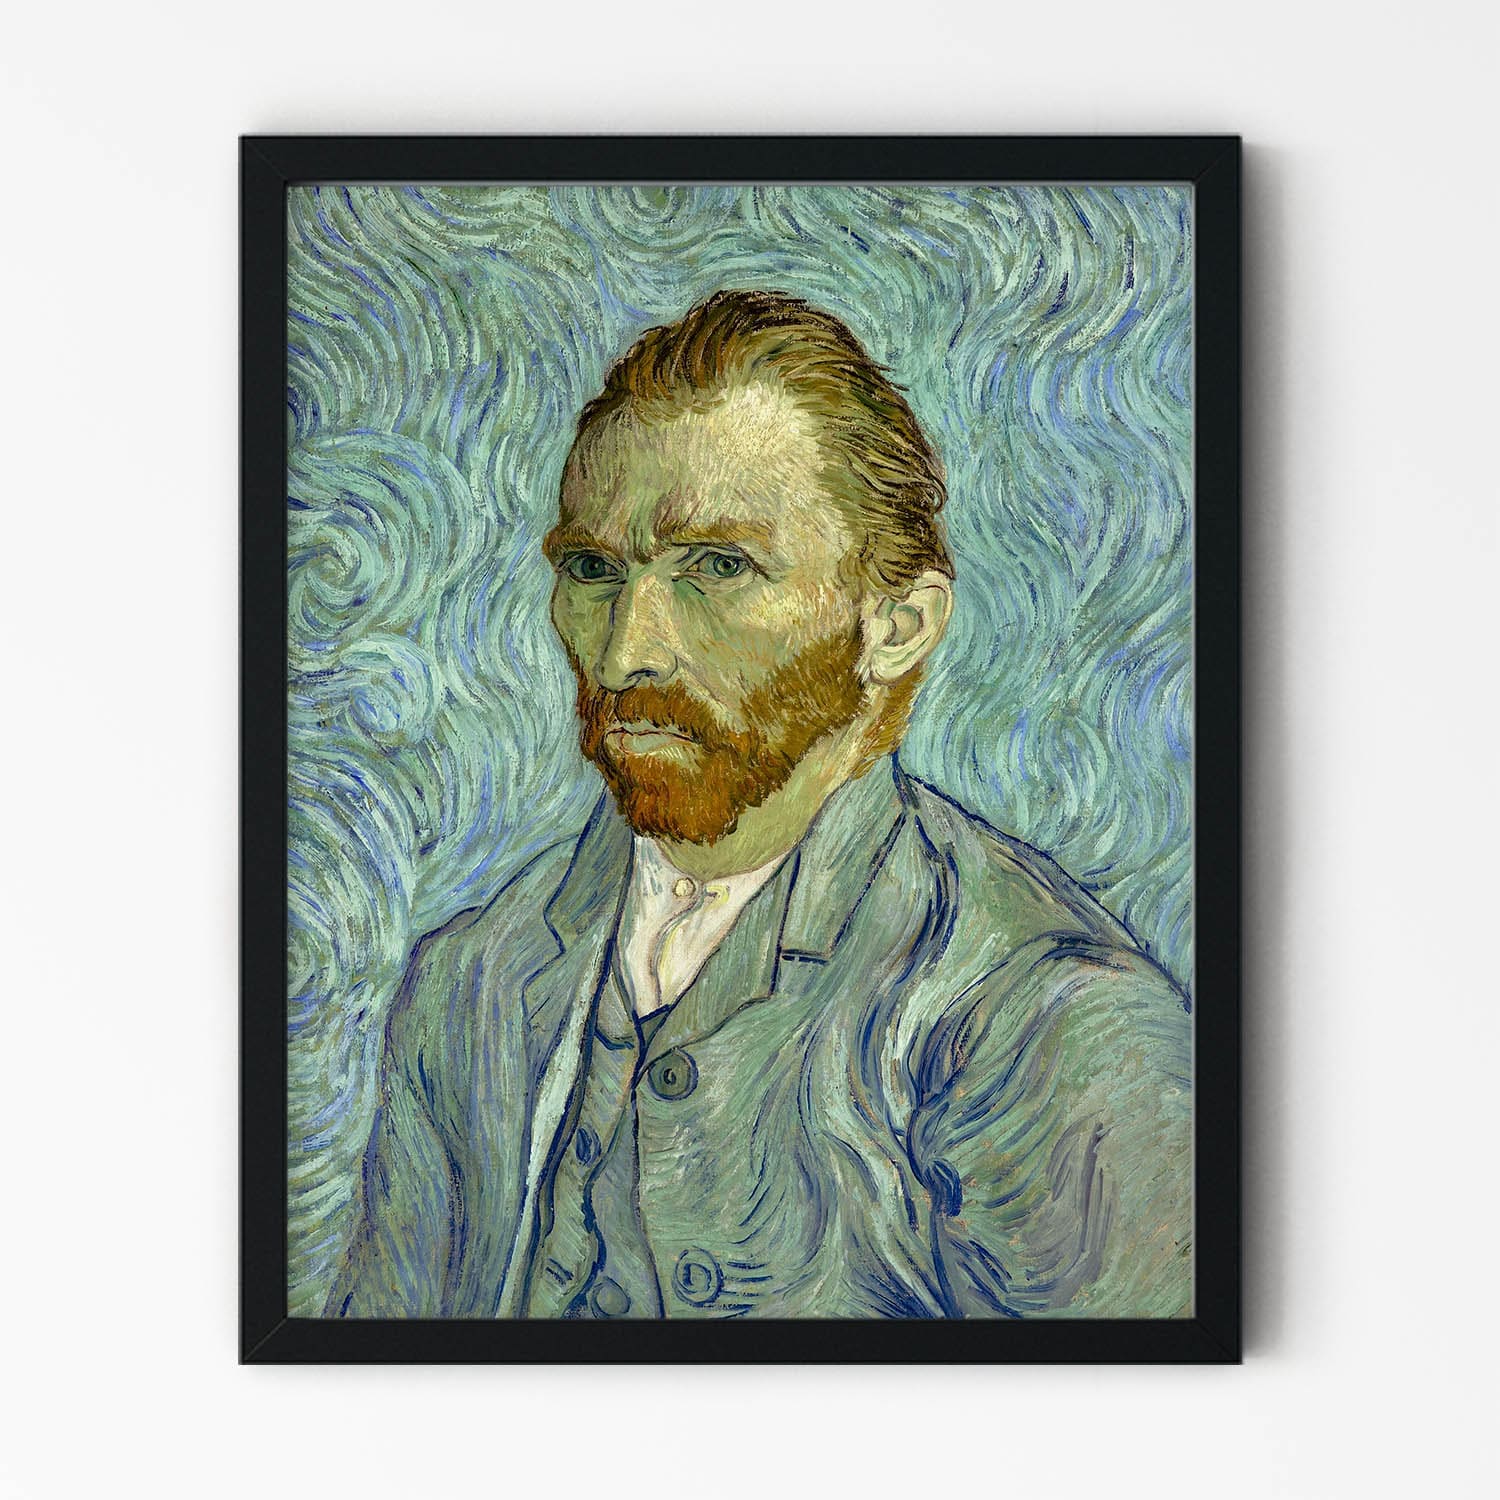 Colorful and Trippy van Gogh Painting in Black Picture Frame